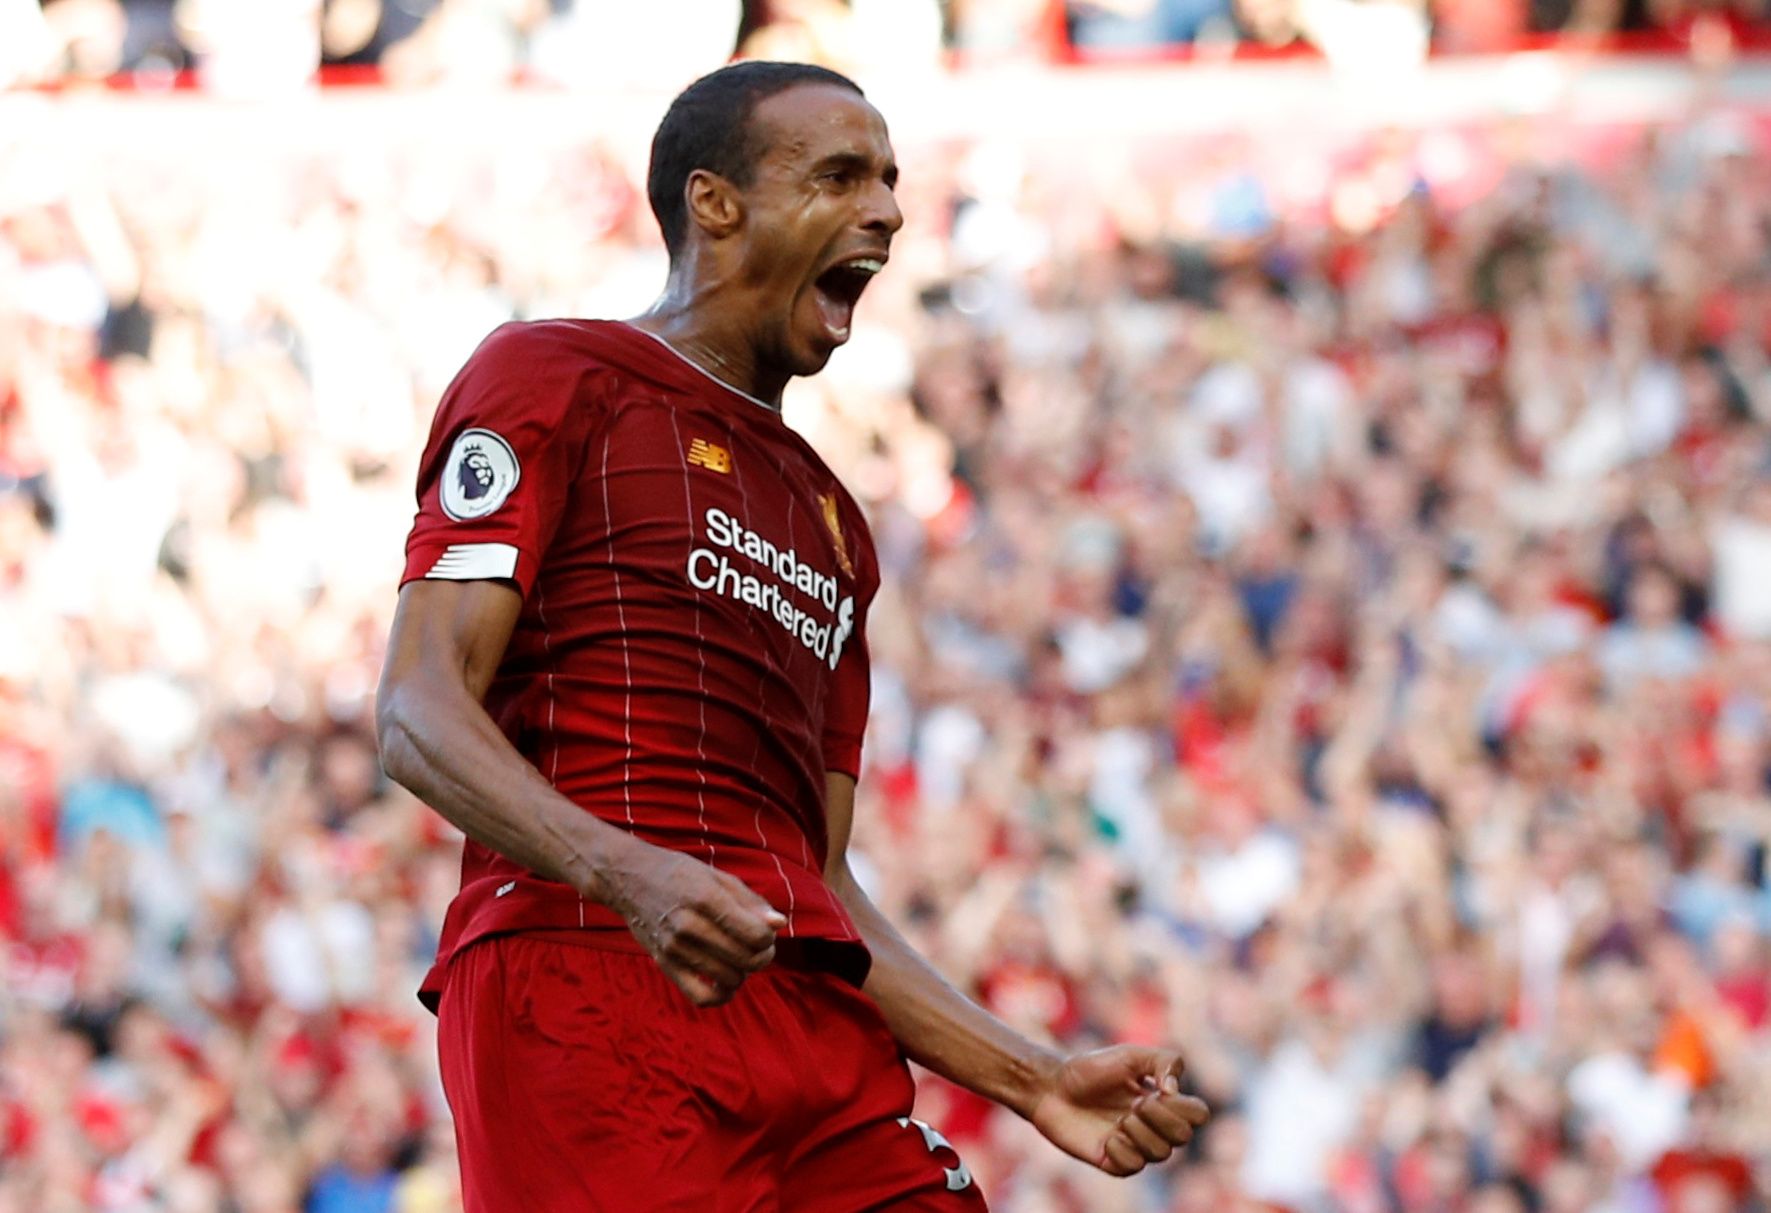 Soccer Football - Premier League - Liverpool v Arsenal - Anfield, Liverpool, Britain - August 24, 2019  Liverpool's Joel Matip celebrates scoring their first goal   REUTERS/Phil Noble  EDITORIAL USE ONLY. No use with unauthorized audio, video, data, fixture lists, club/league logos or 